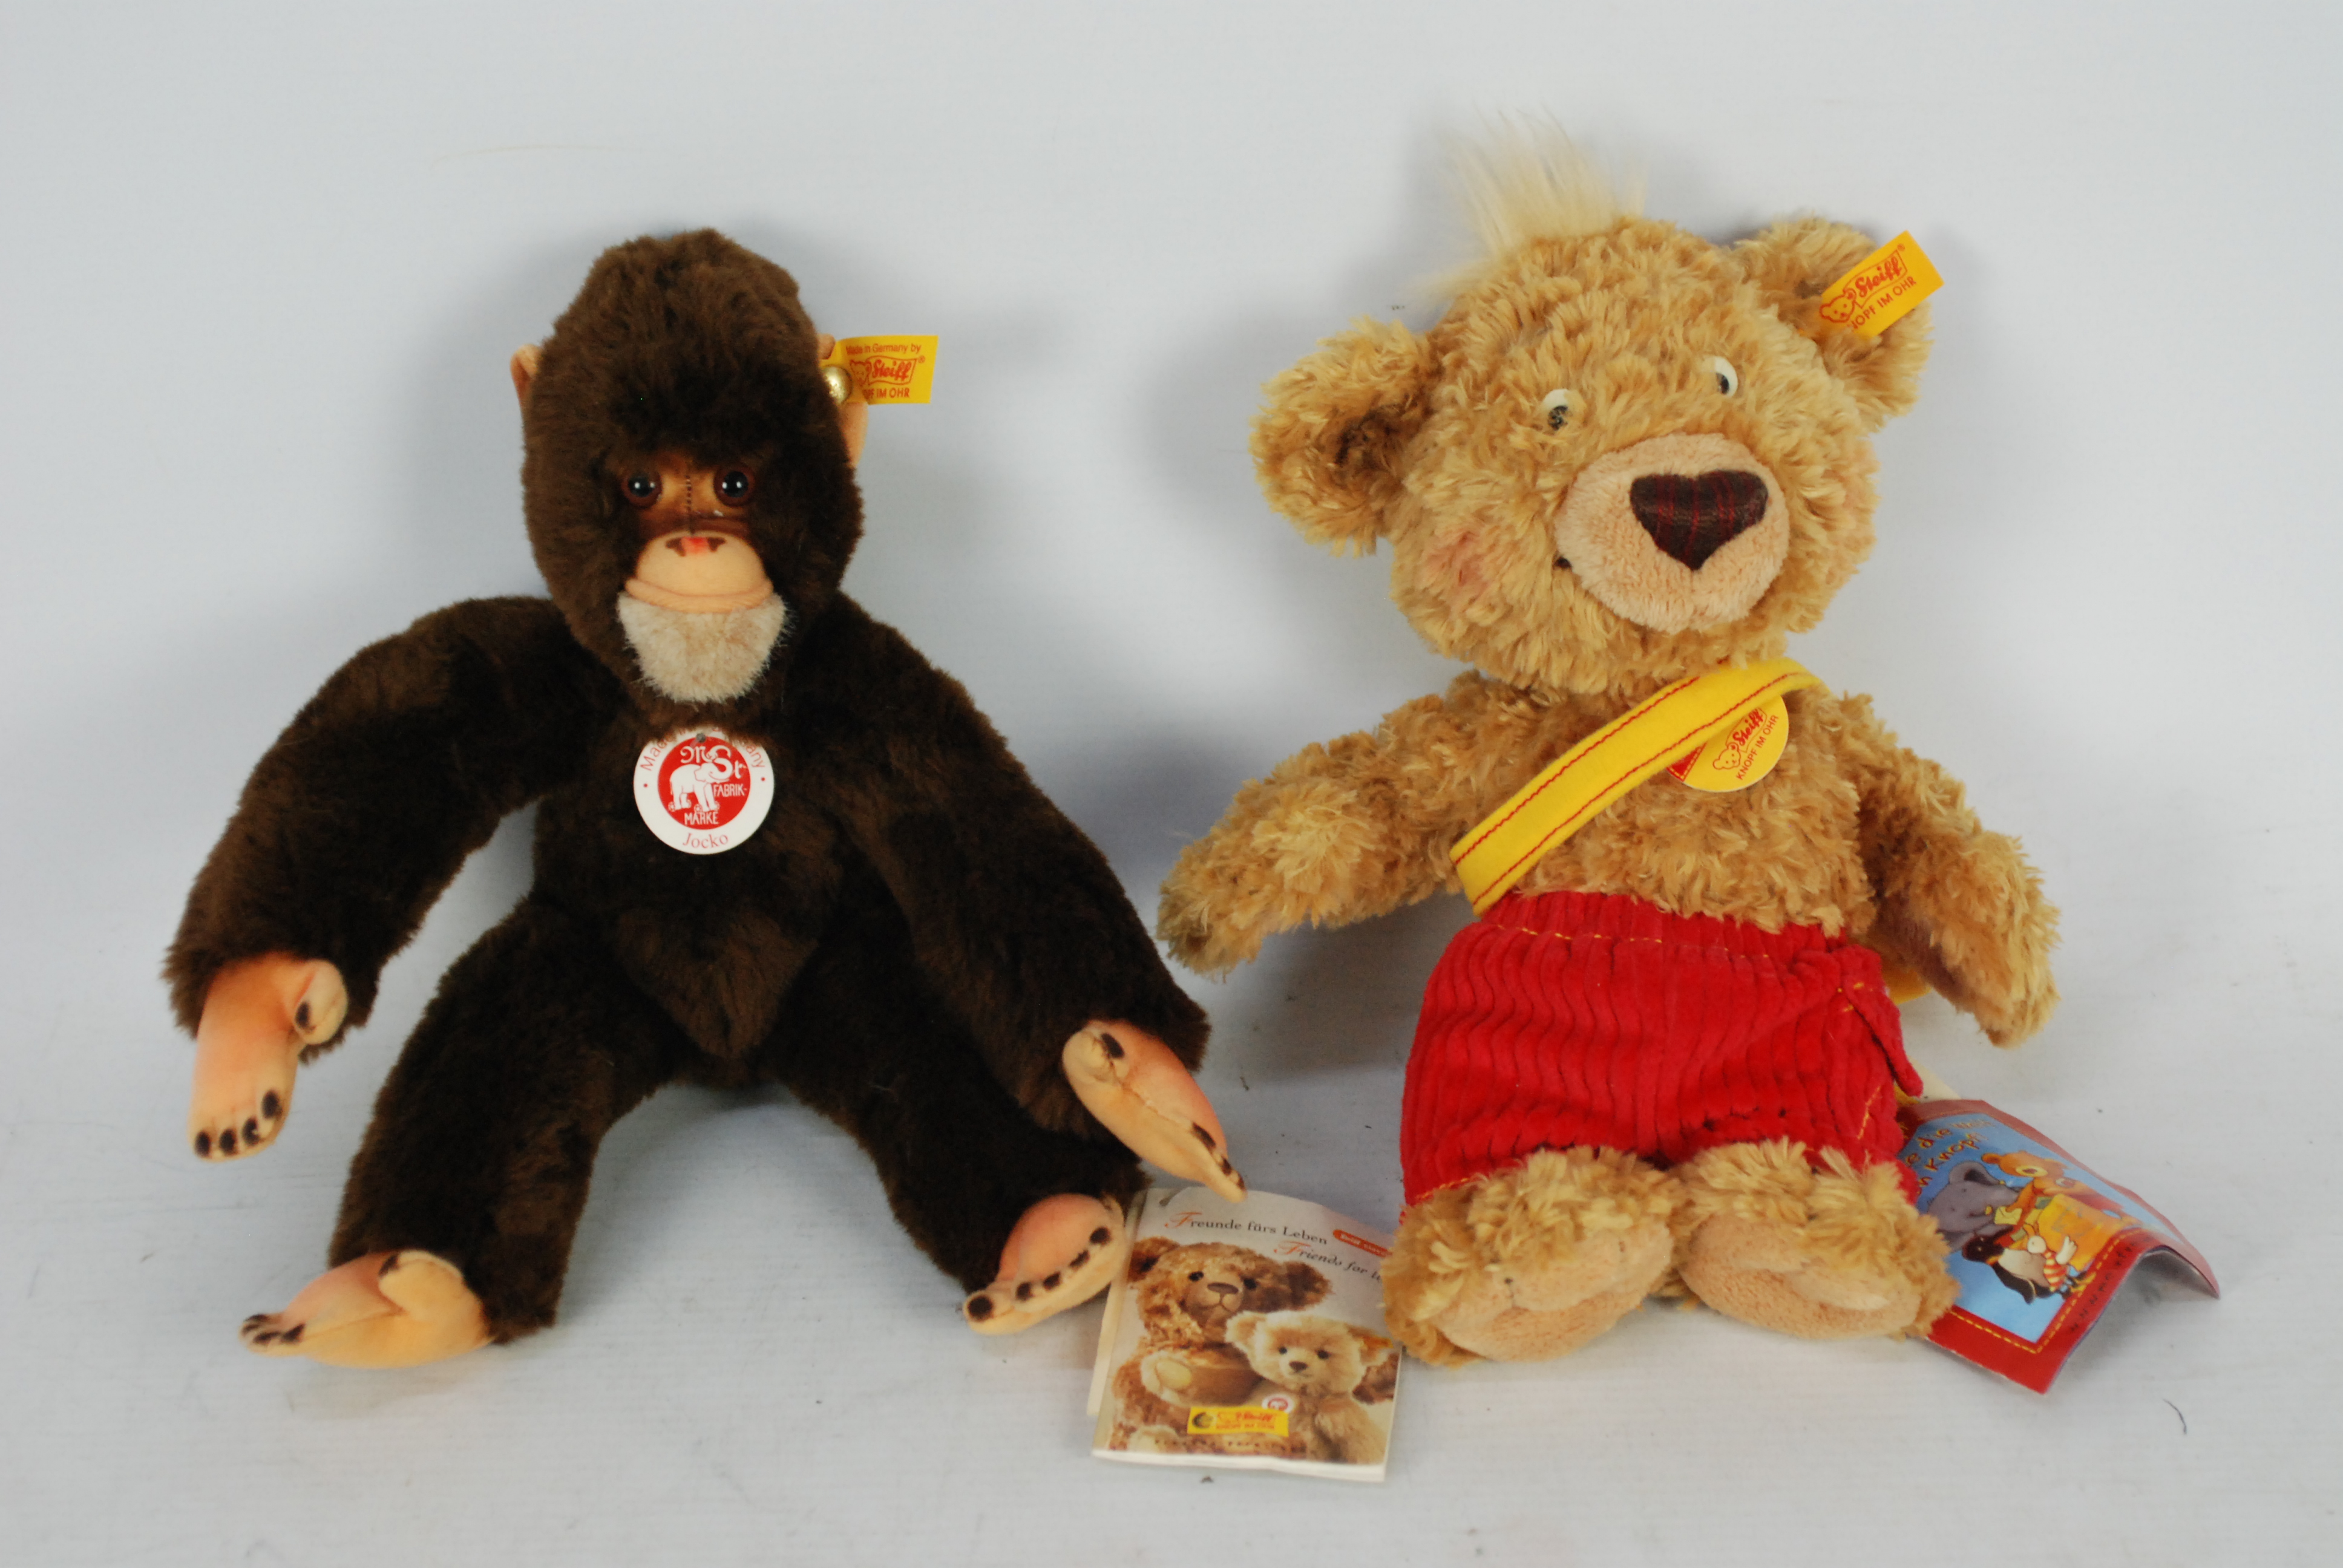 Steiff - Two Steiff bears - Lot includes a 'Jocko' monkey with yellow tag on its ear.